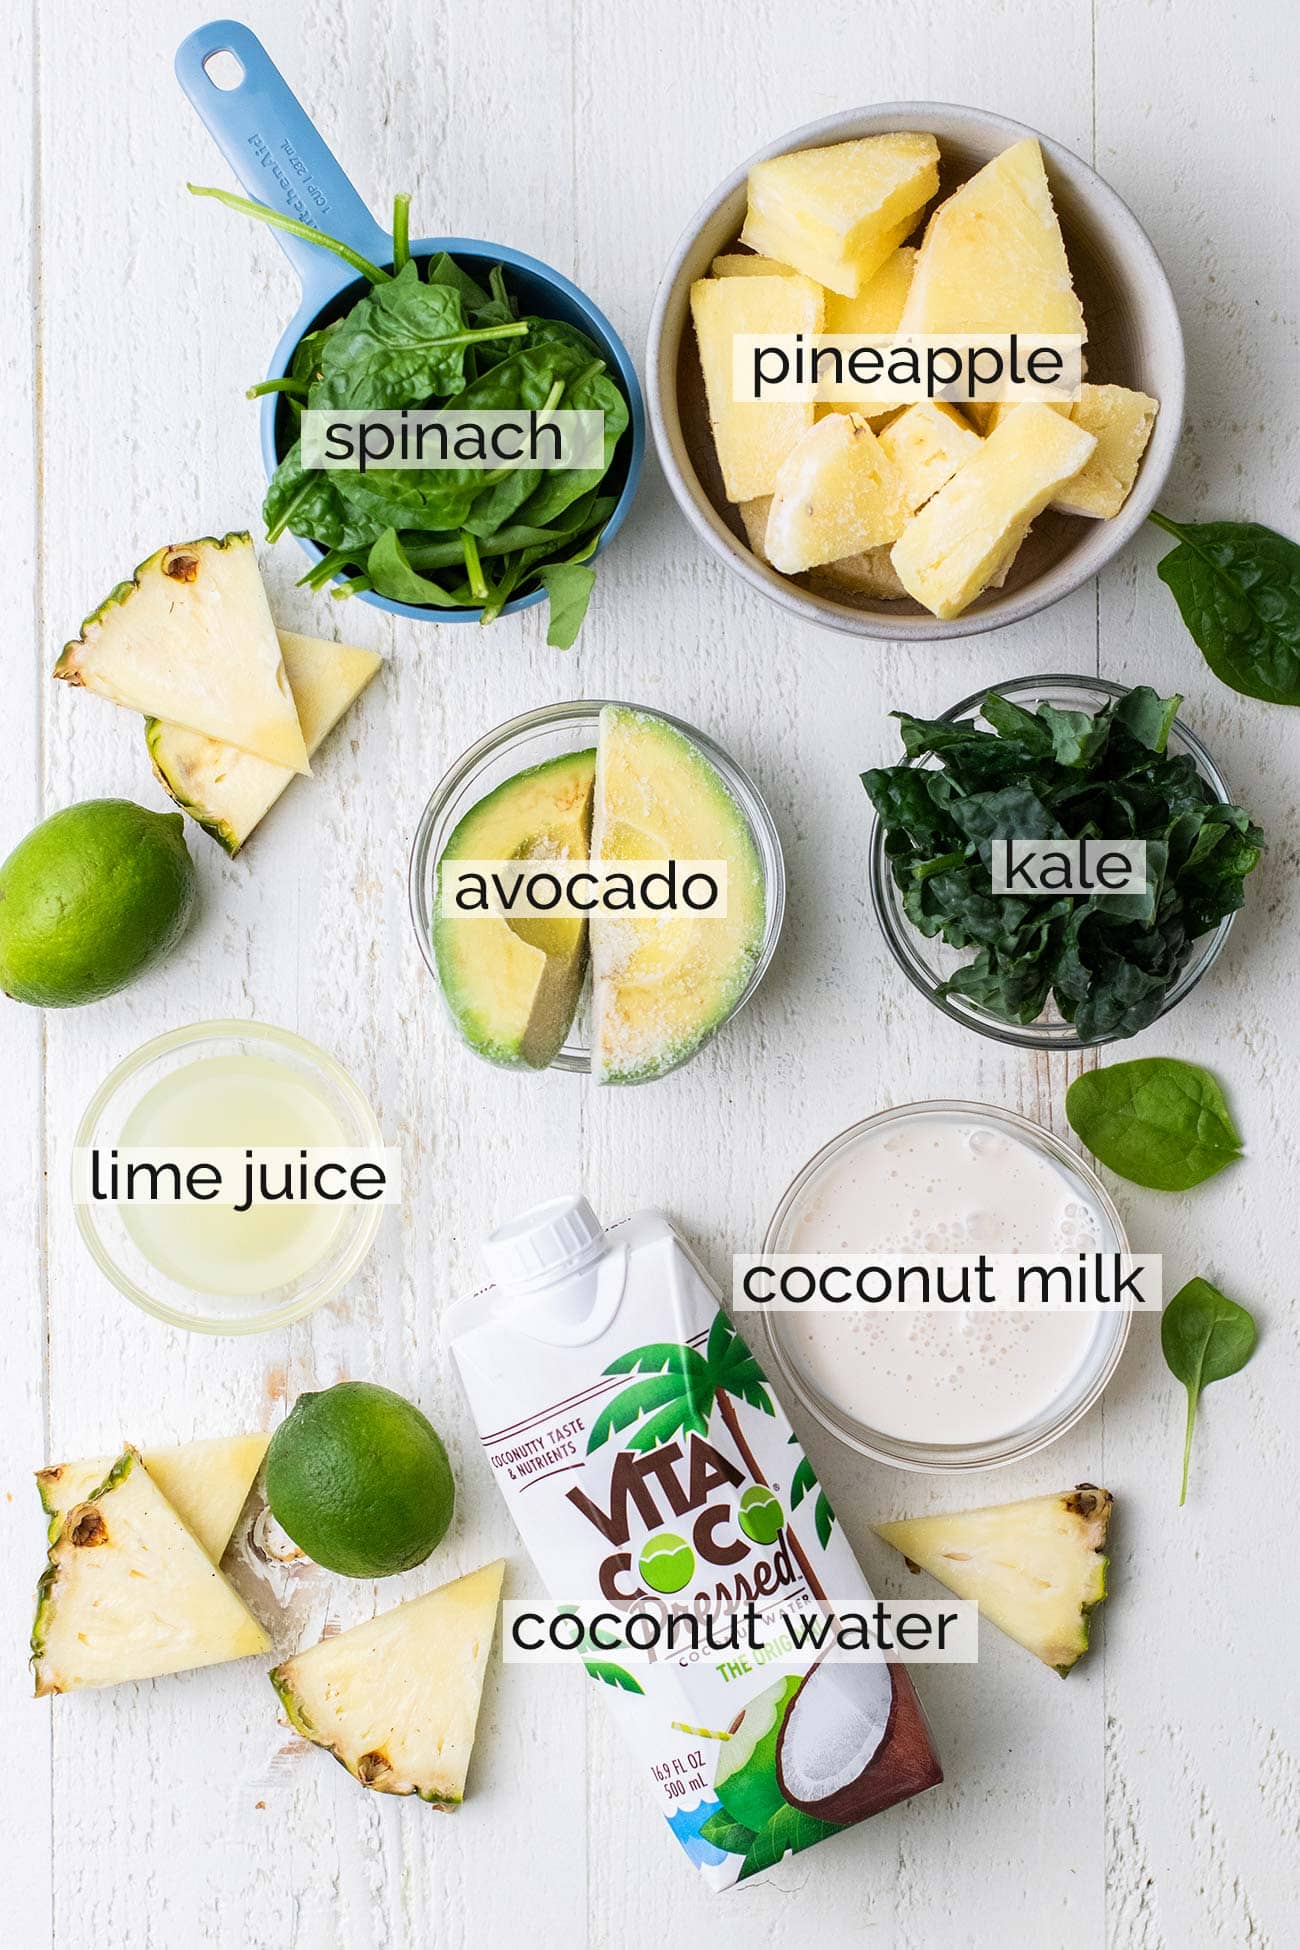 The ingredients needed to make a tropical smoothie avocolada remake.